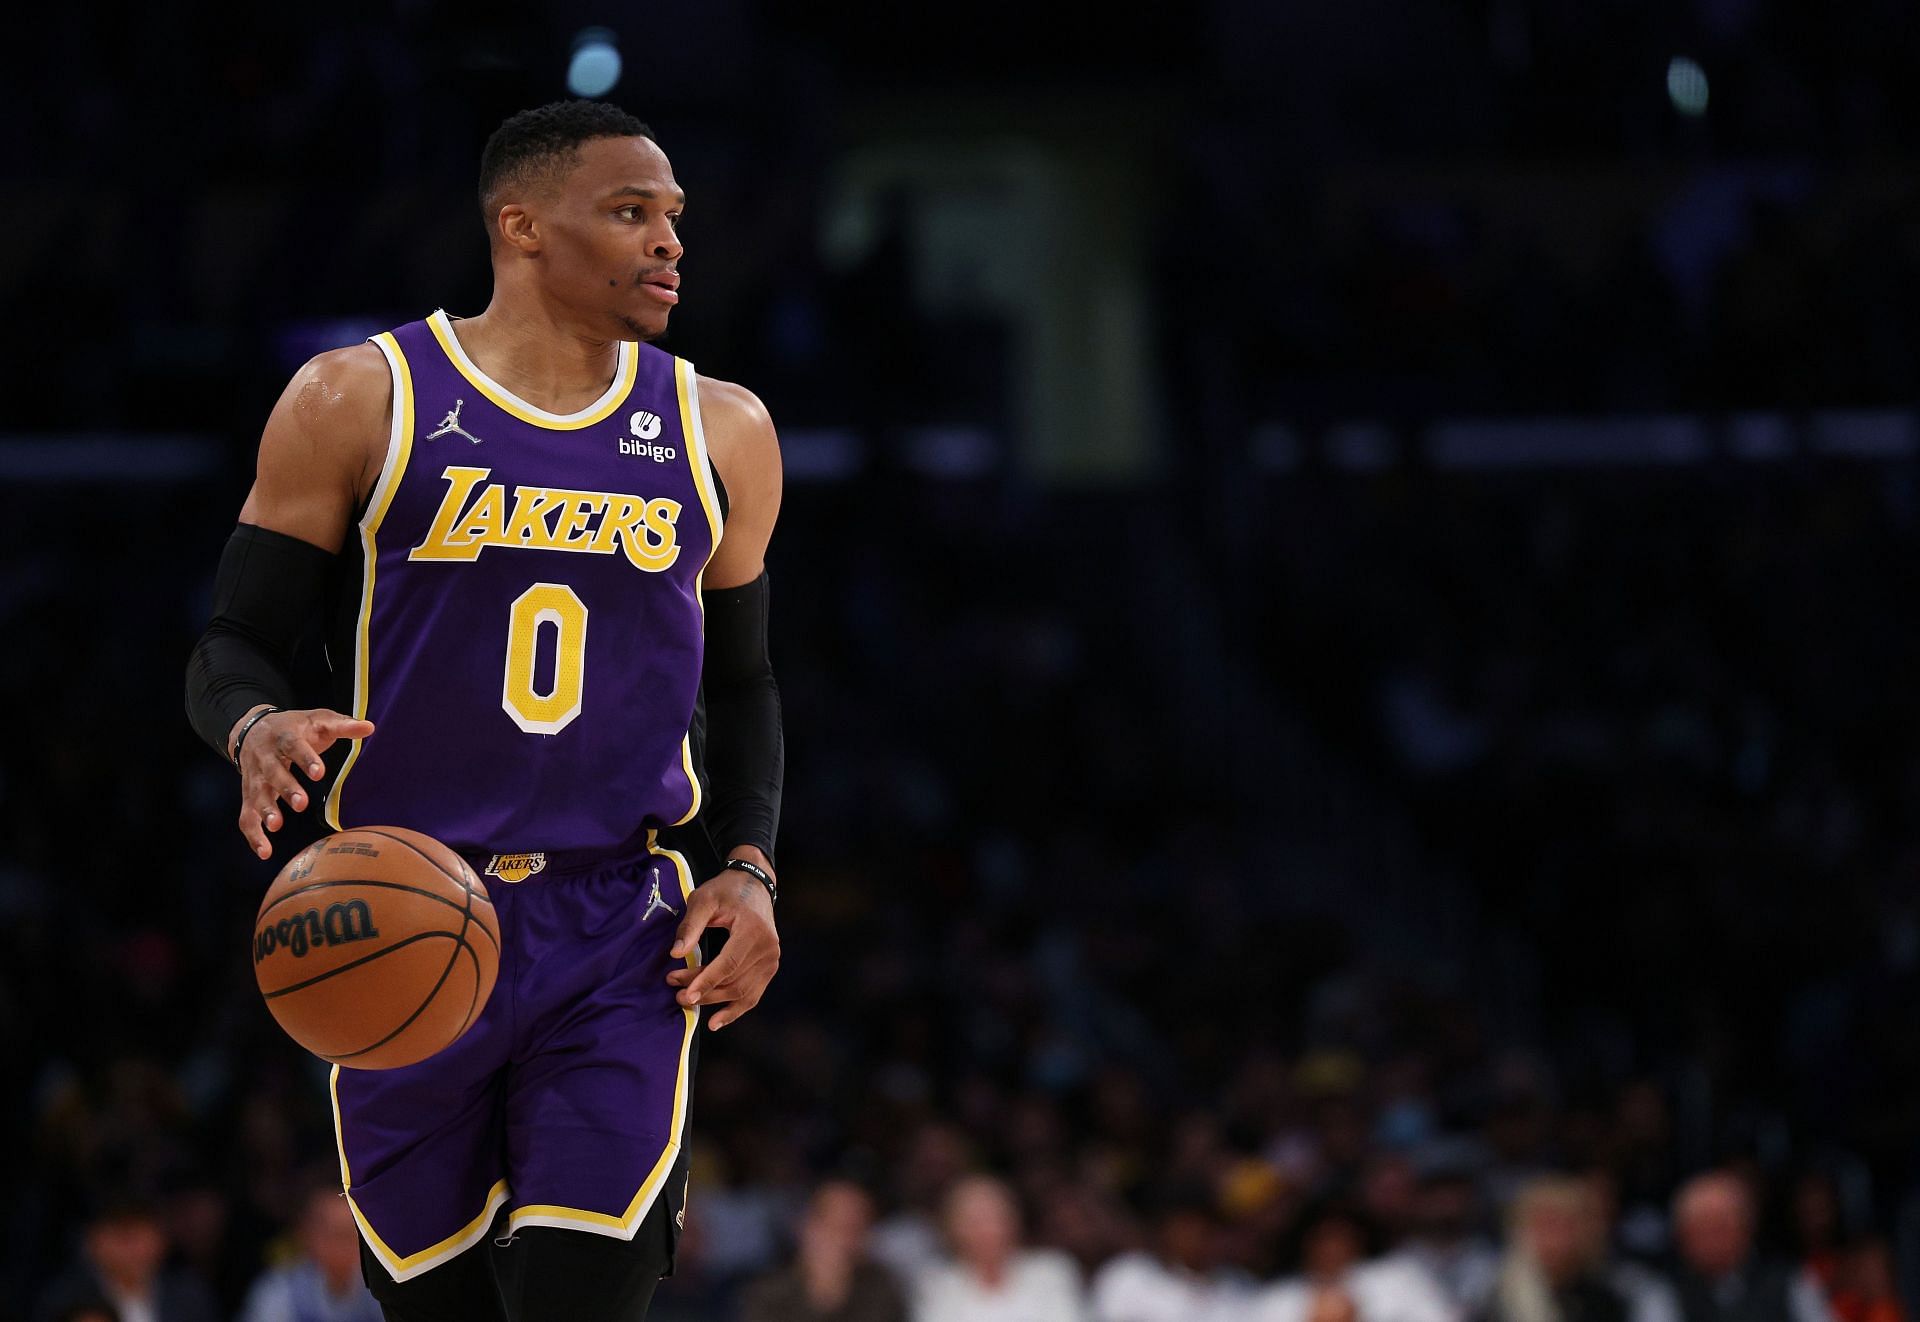 Russell Westbrook #0 of the Los Angeles Lakers brings up the ball during a 126-121 Philadelphia 76ers win at Crypto.com Arena on March 23, 2022 in Los Angeles, California.